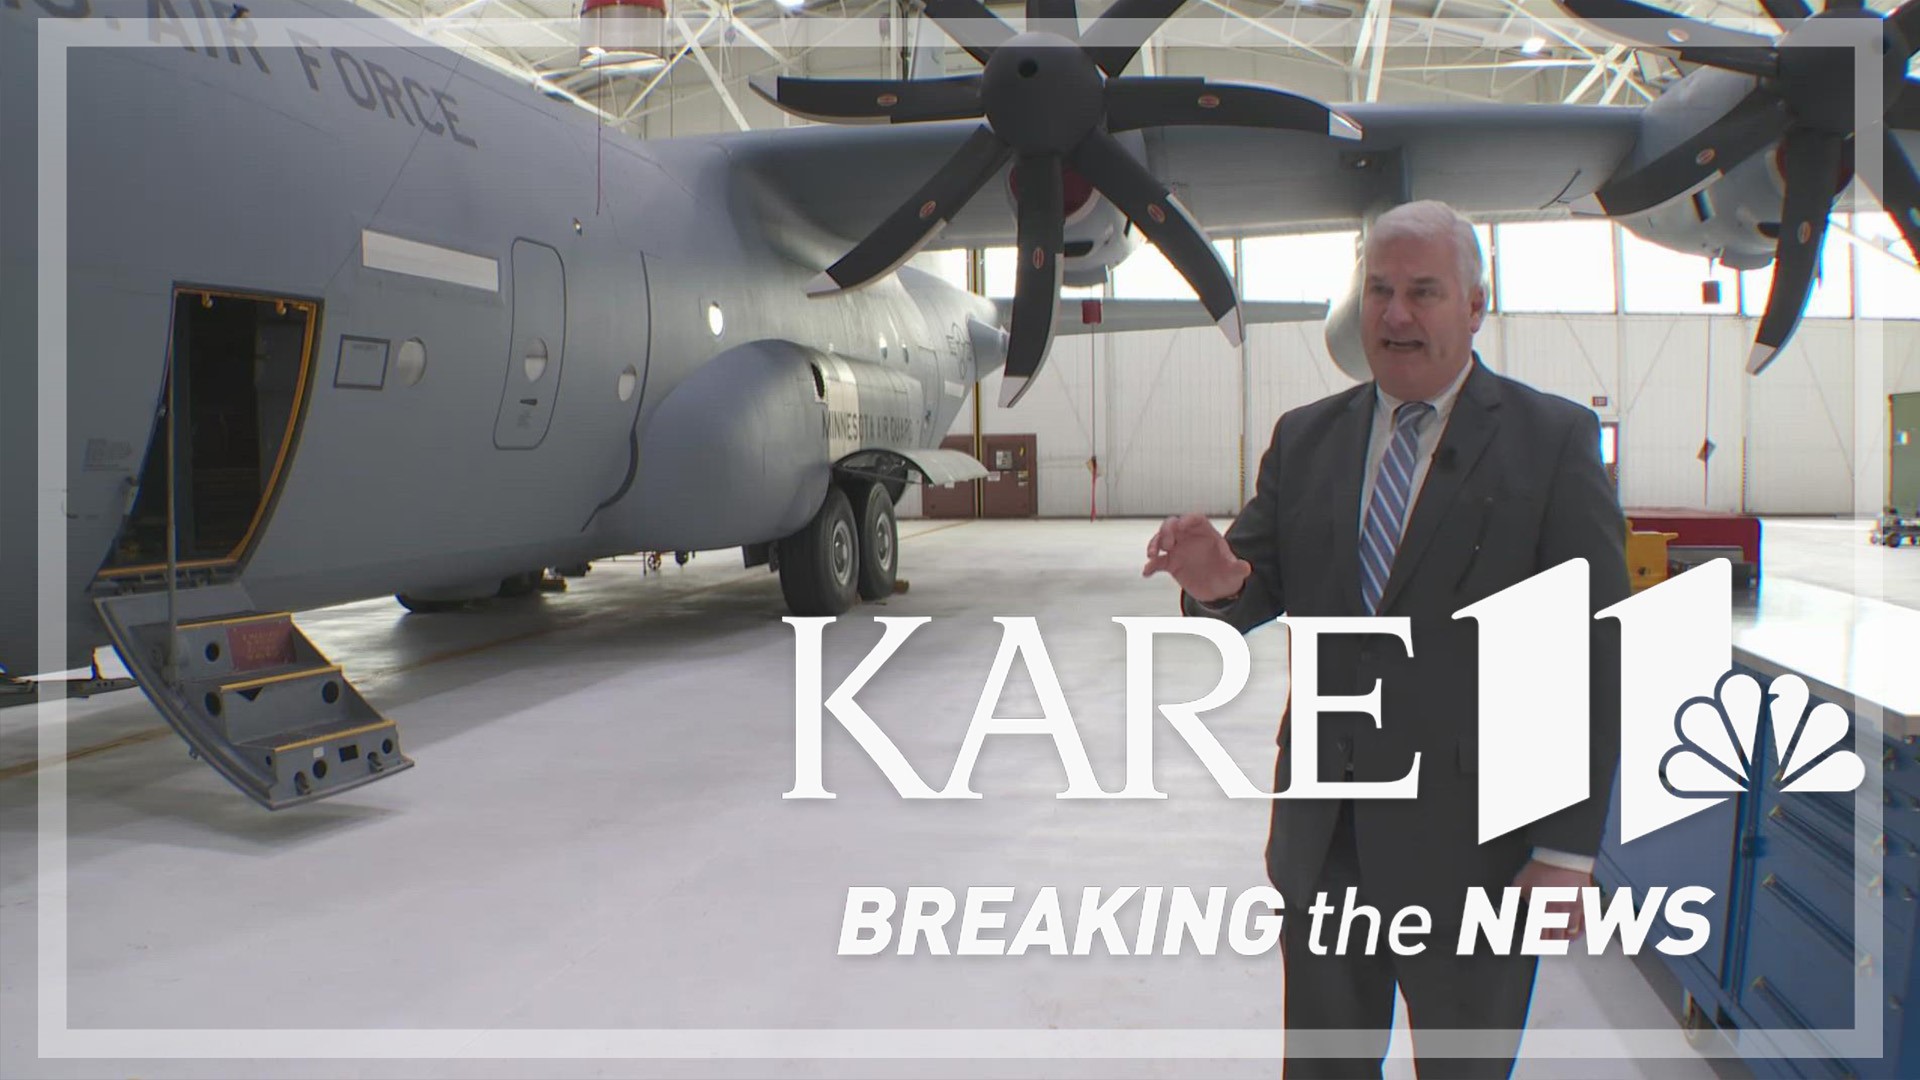 Rep. Tom Emmer visited the 133rd Airlift Wing of the Minnesota Air National Guard, which is trying to replace some of its aircrafts.